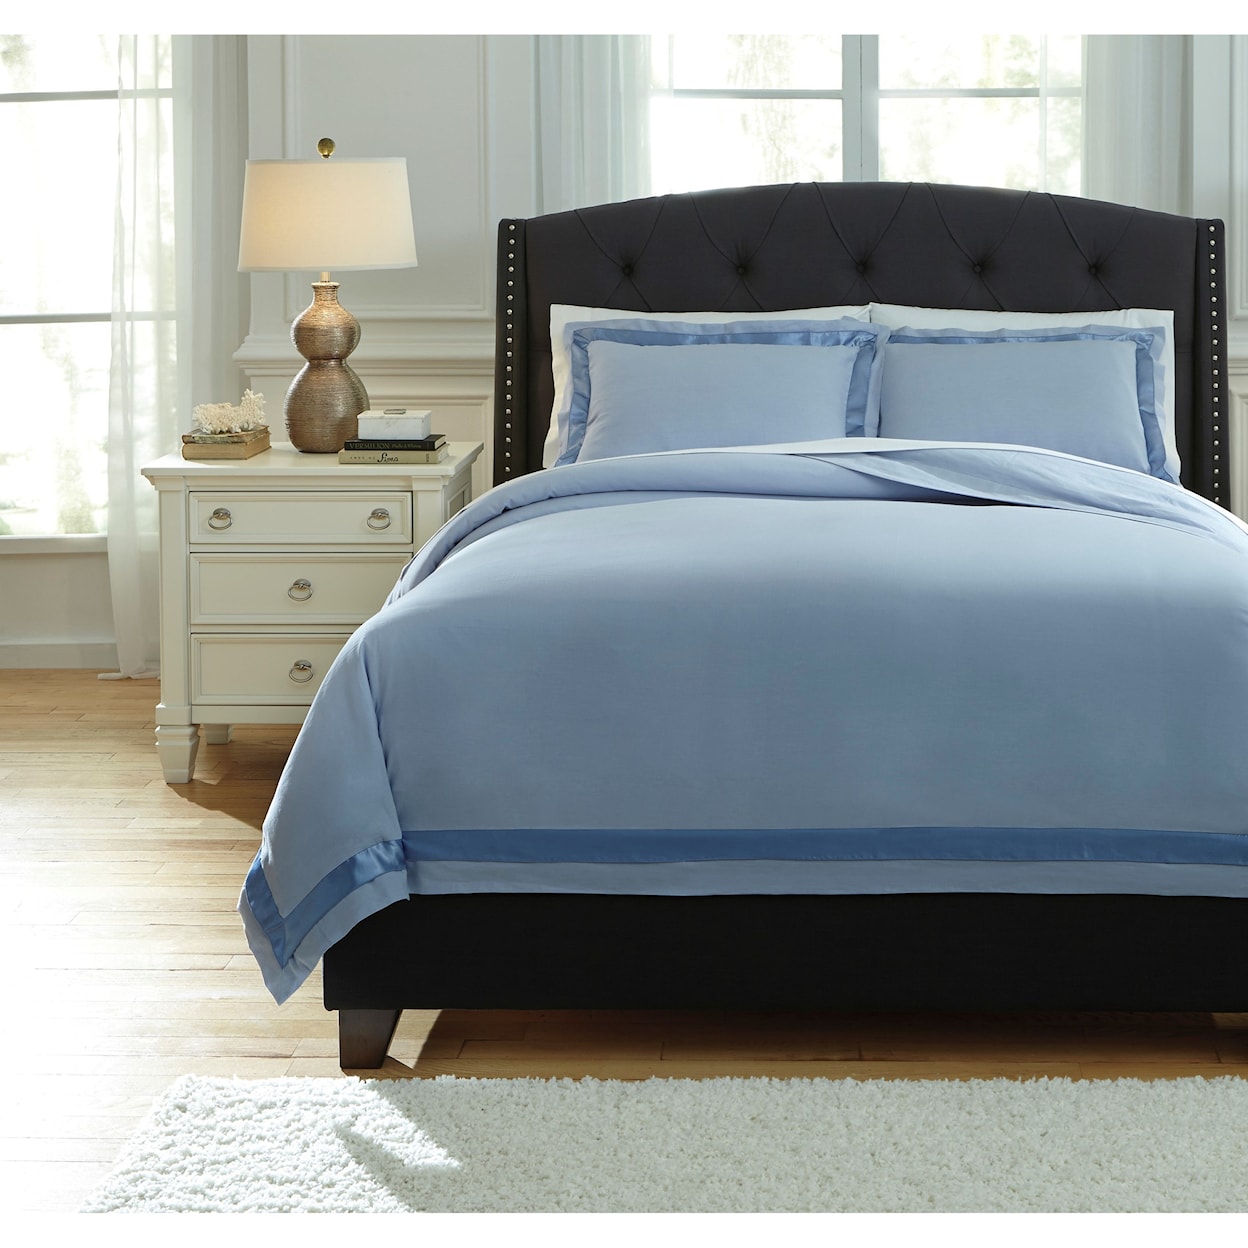 Signature Design by Ashley Furniture Bedding Sets Queen Faraday Soft Blue Duvet Cover Set